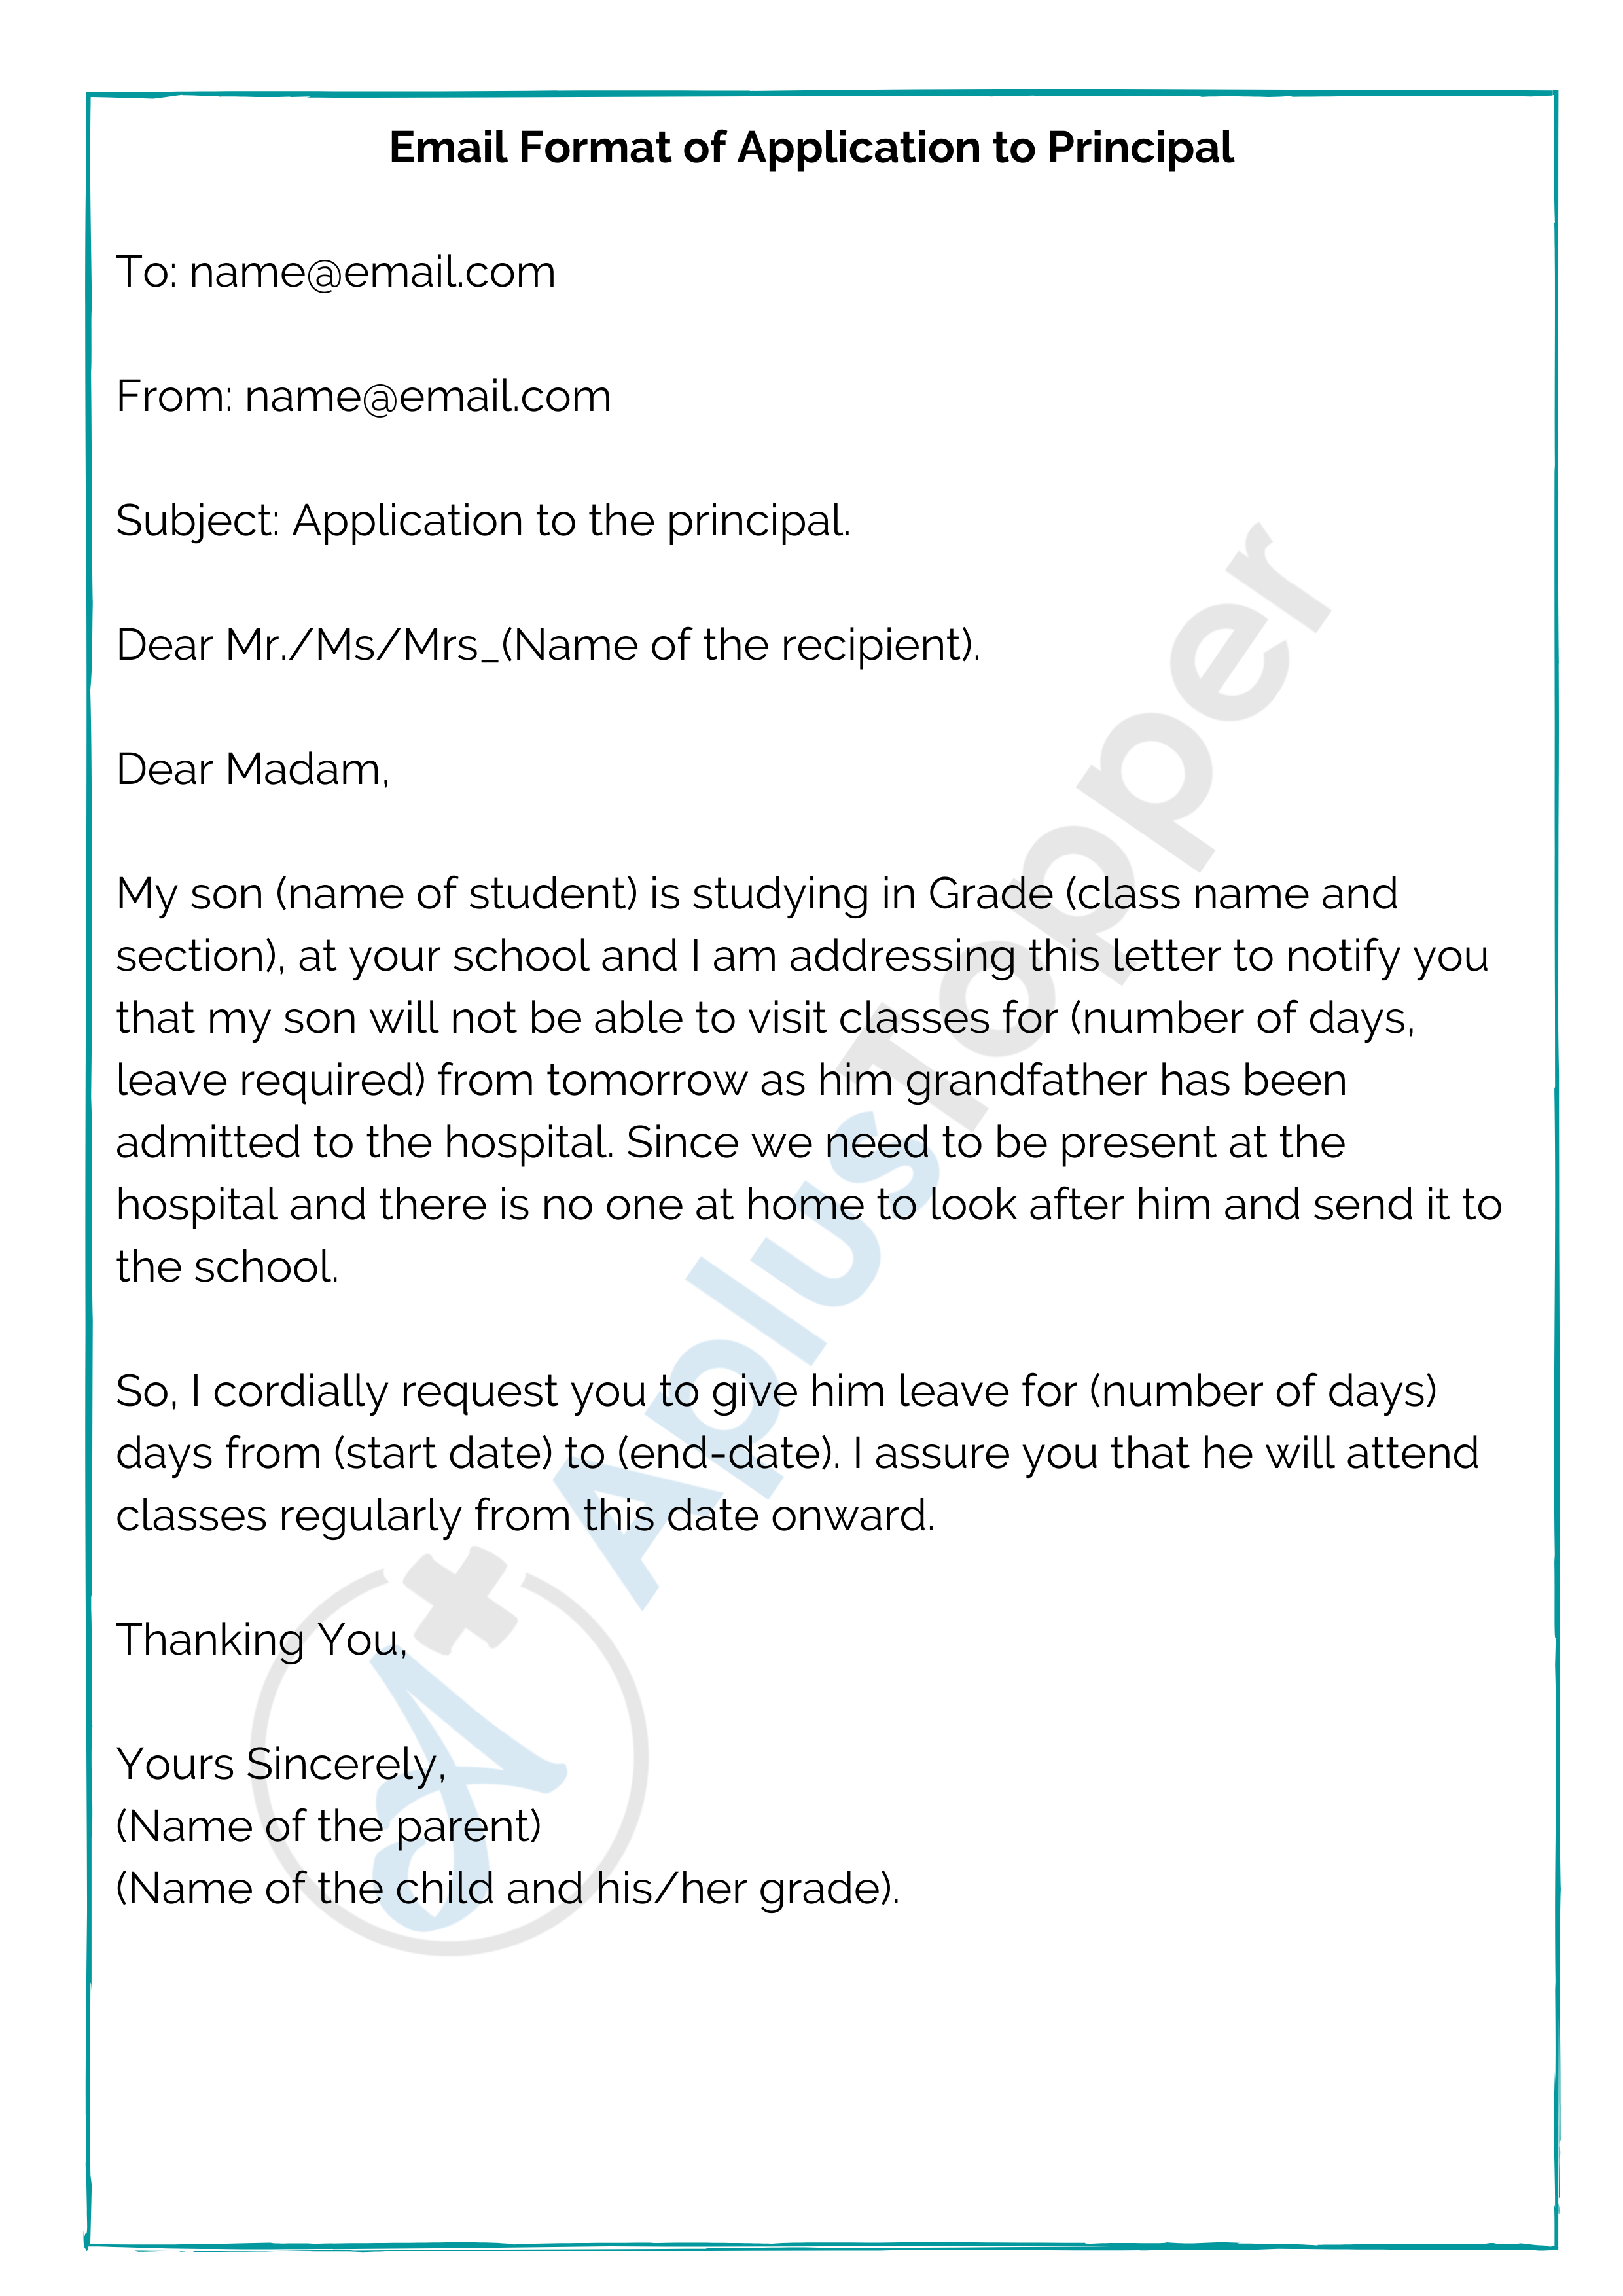 how to write application letter to college principal